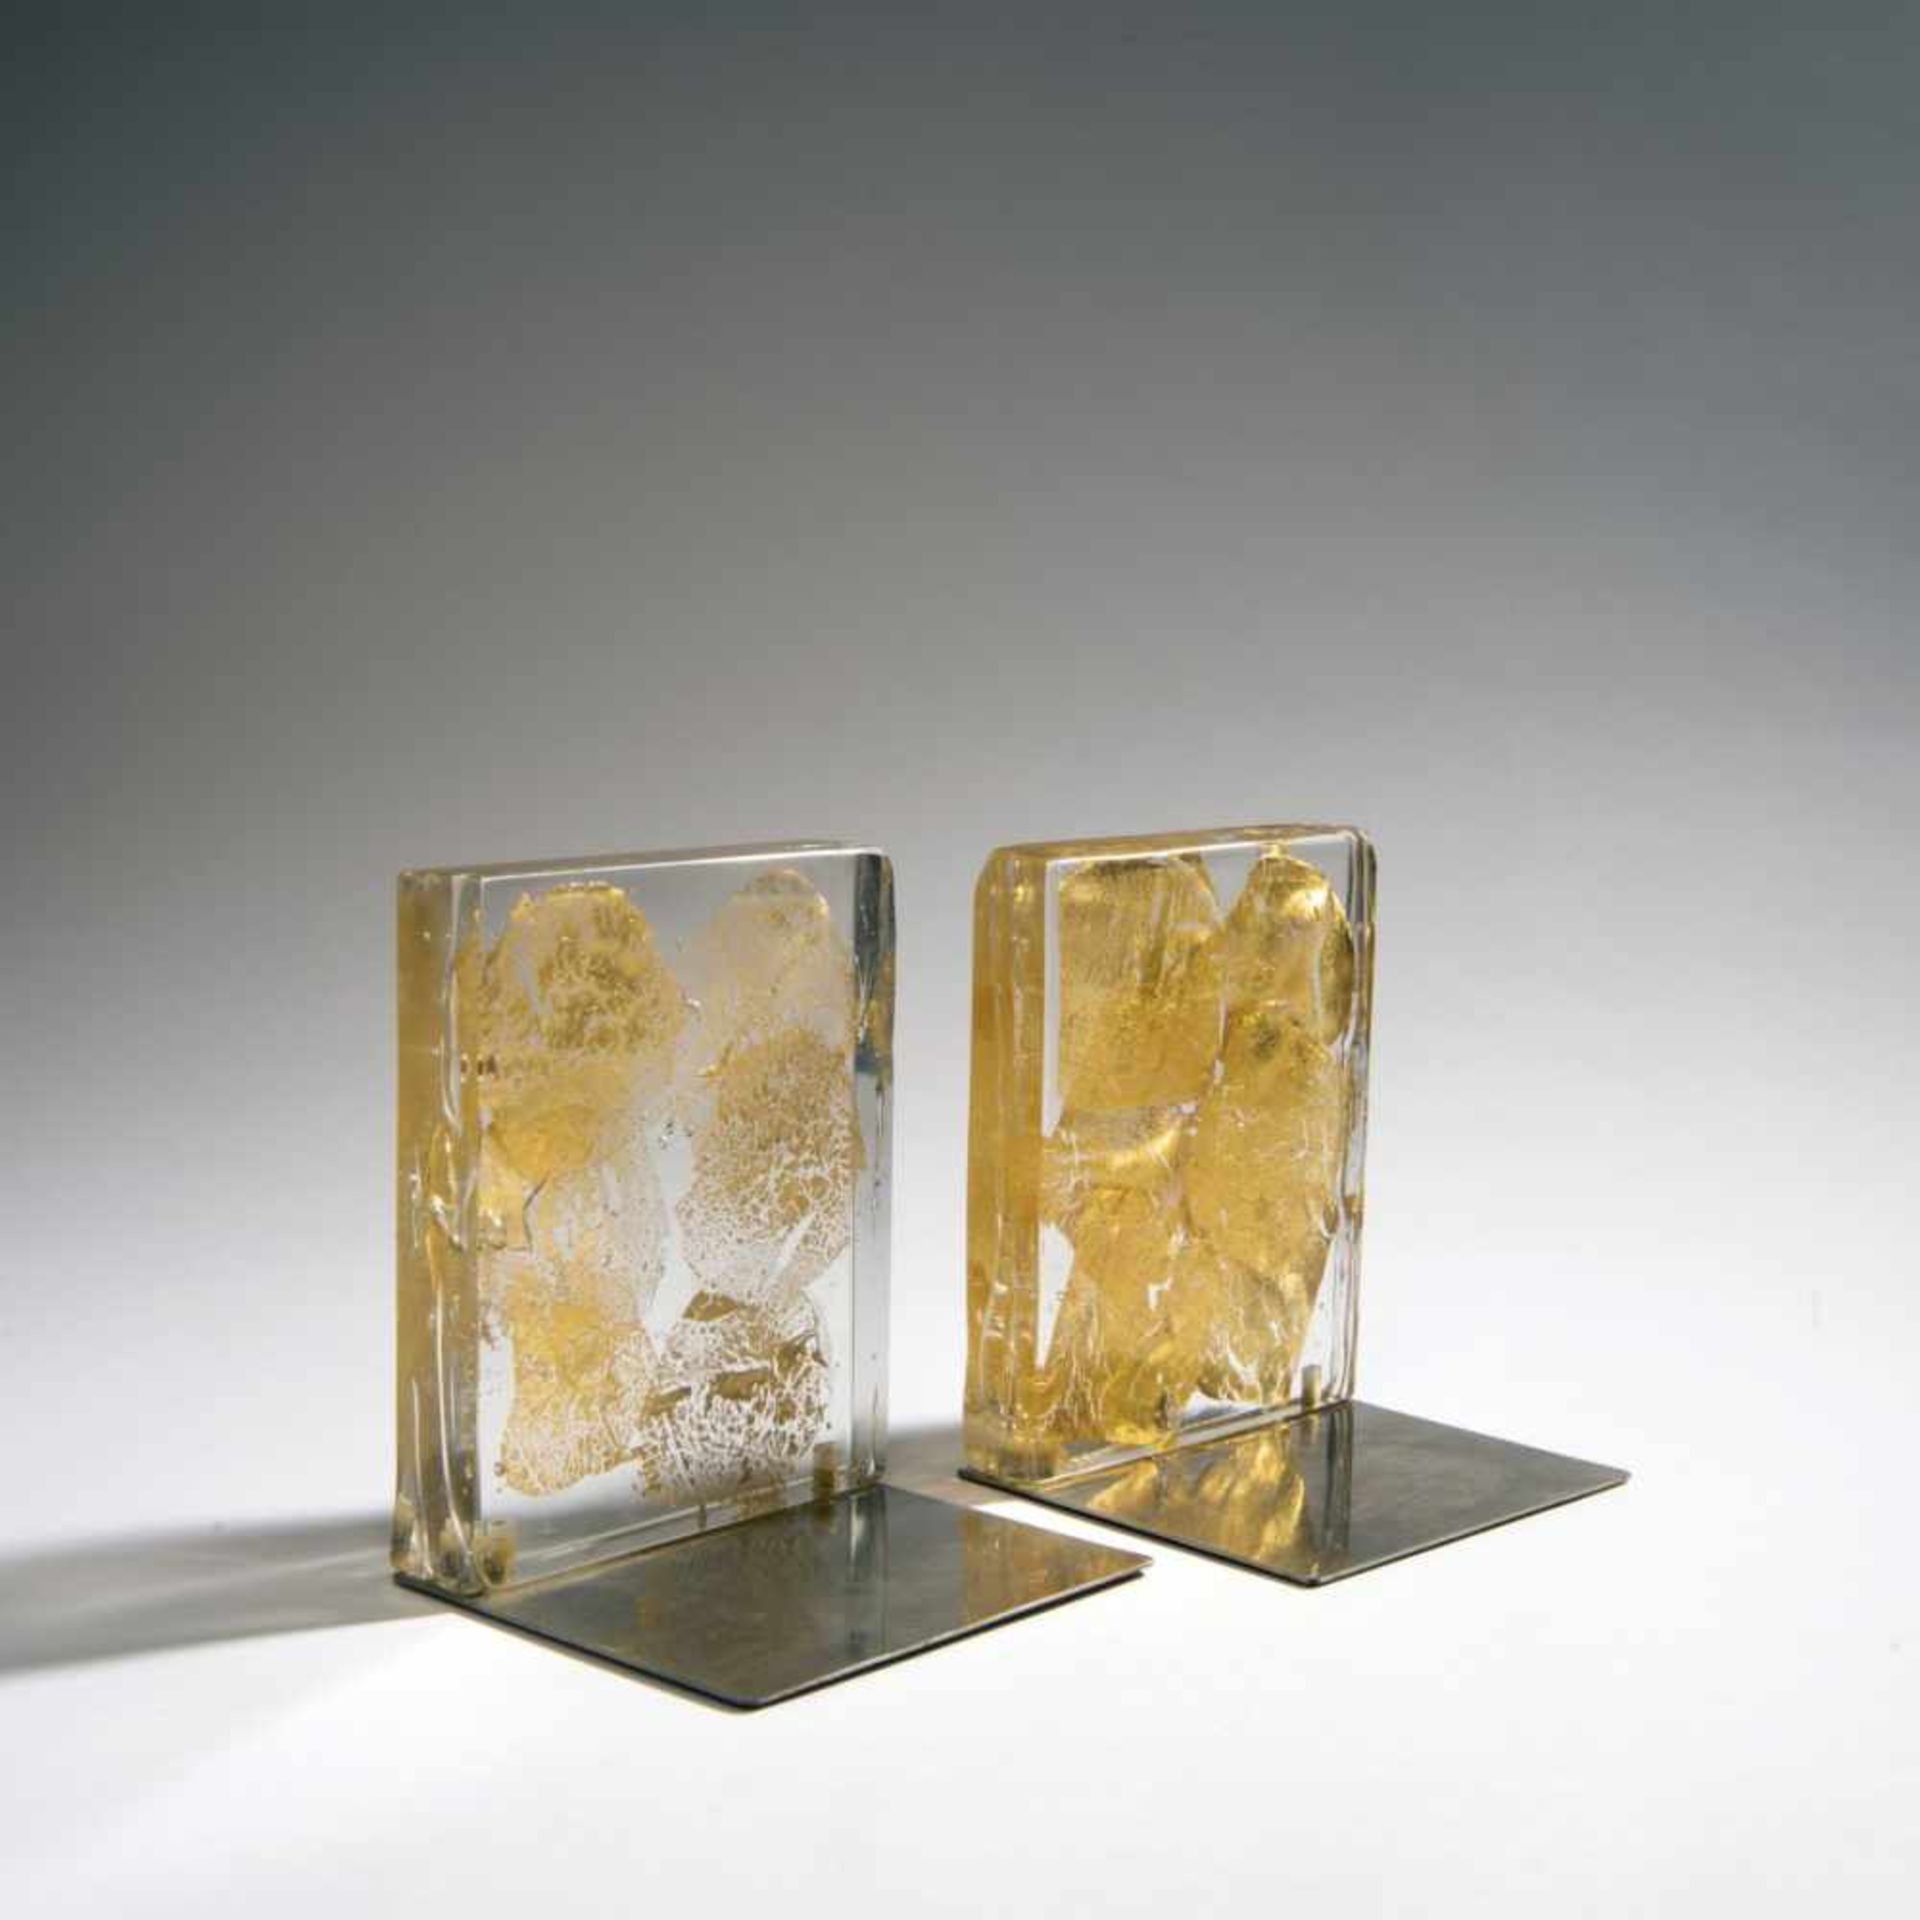 Gio Ponti, A pair of bookends, c. 1950